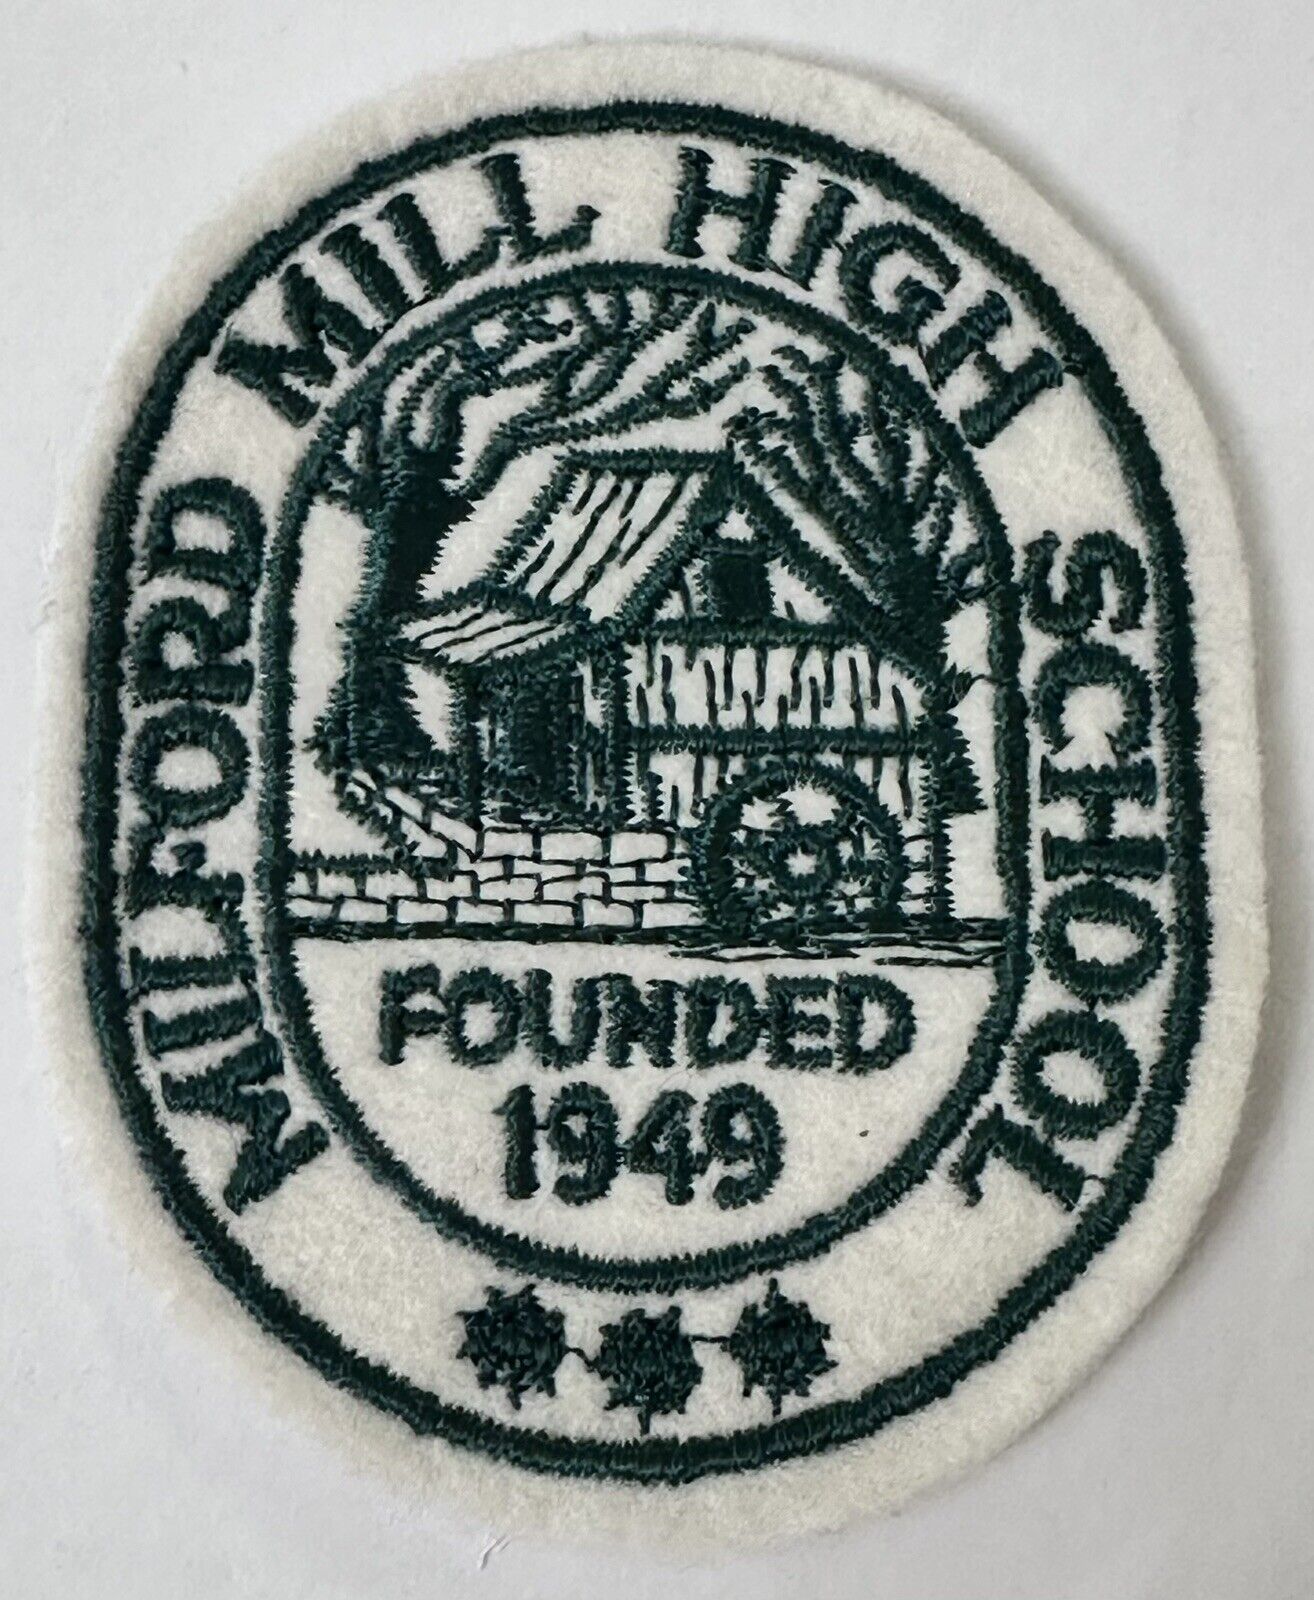 Milford Mill Academy High School Founded 1949 Baltimore, Maryland Patch 3” x 4”